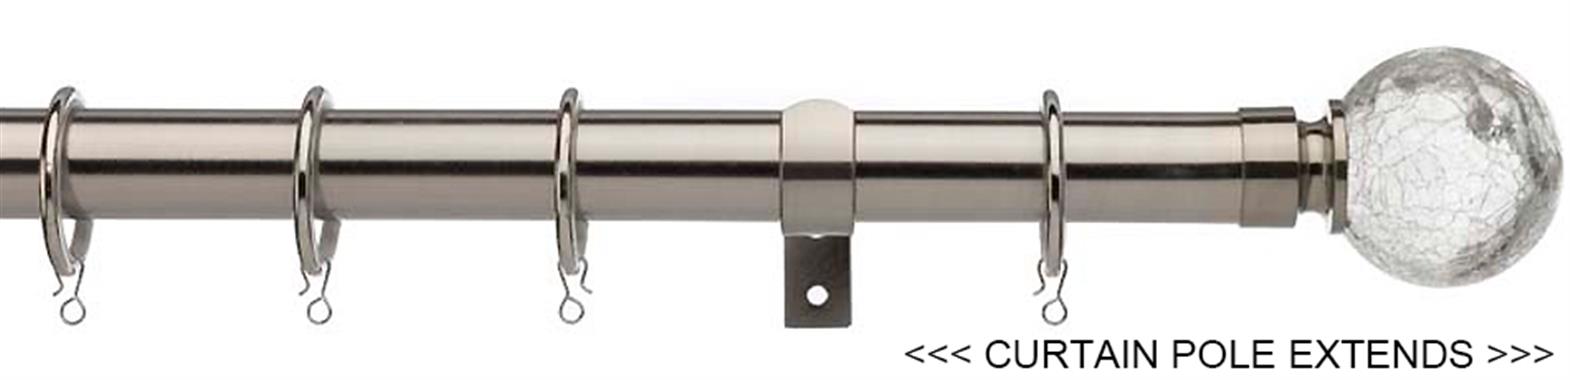 Universal 16/19mm Metal Extendable Curtain Pole, Satin Steel, Crackled Glass